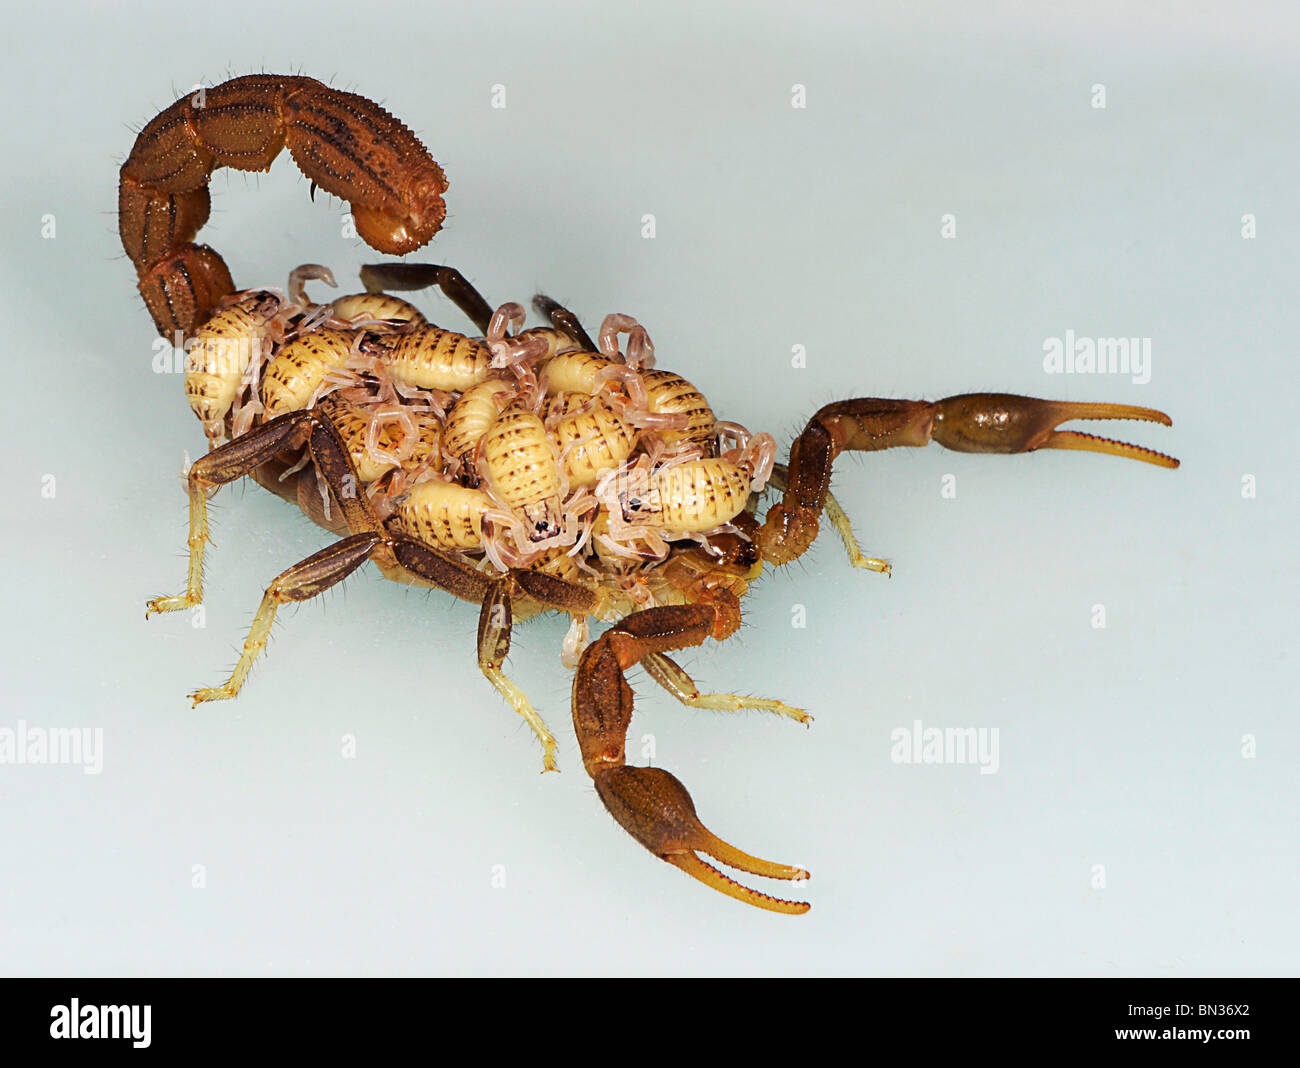 Hottentota scorpion, photographed in Tanzania, Africa carrying its young on its back, a feature of its maternal behavior. Stock Photo